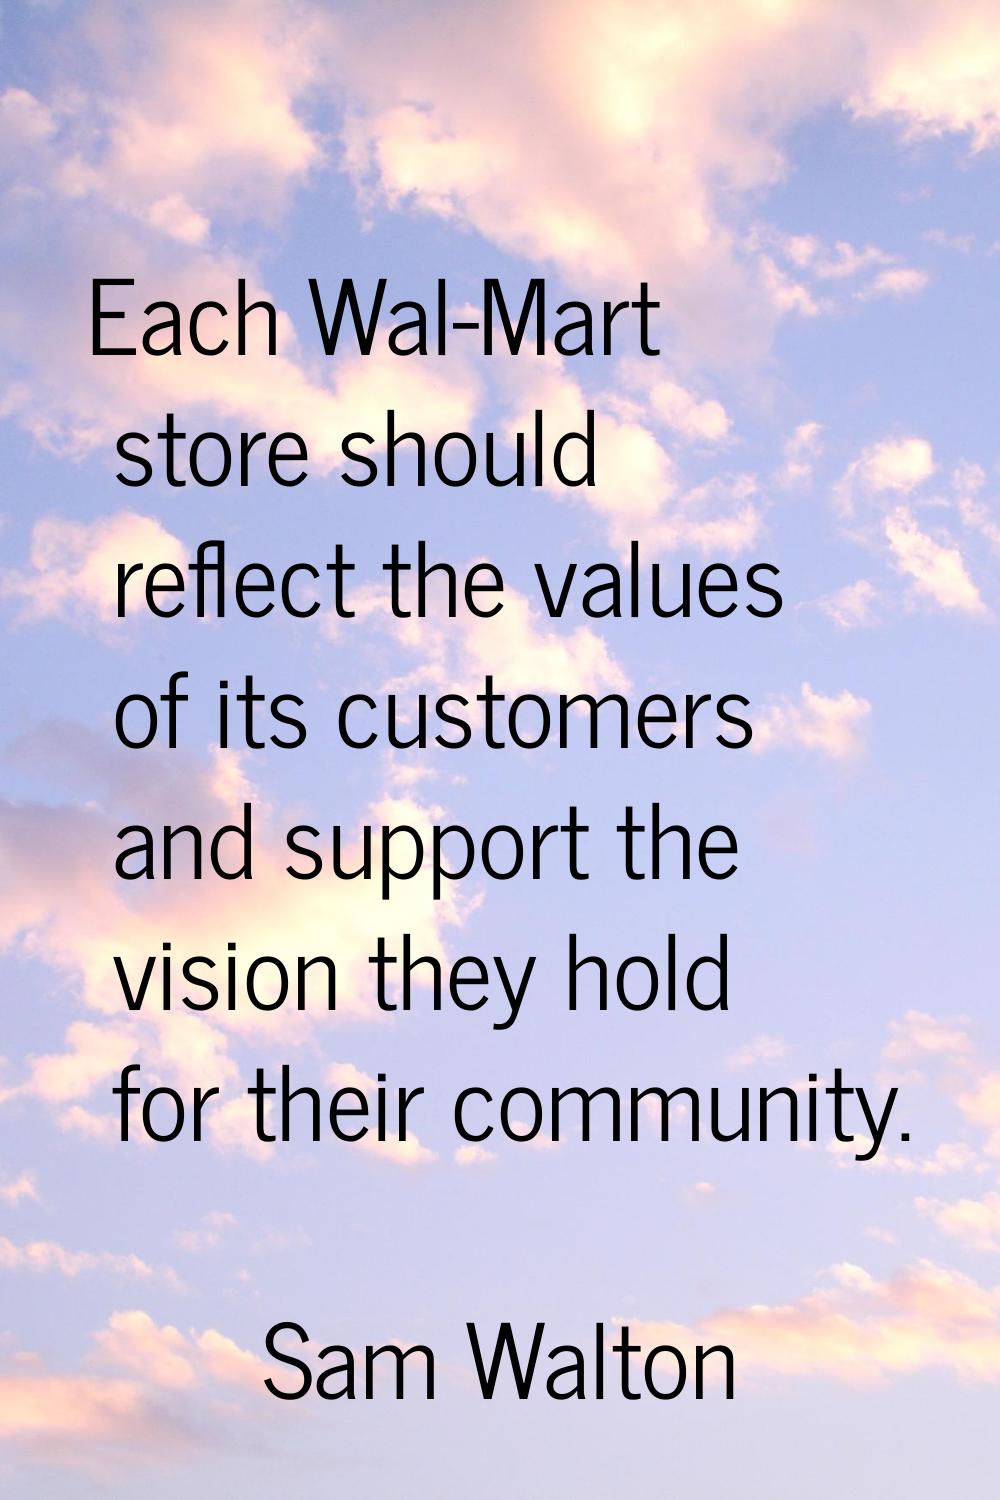 Each Wal-Mart store should reflect the values of its customers and support the vision they hold for